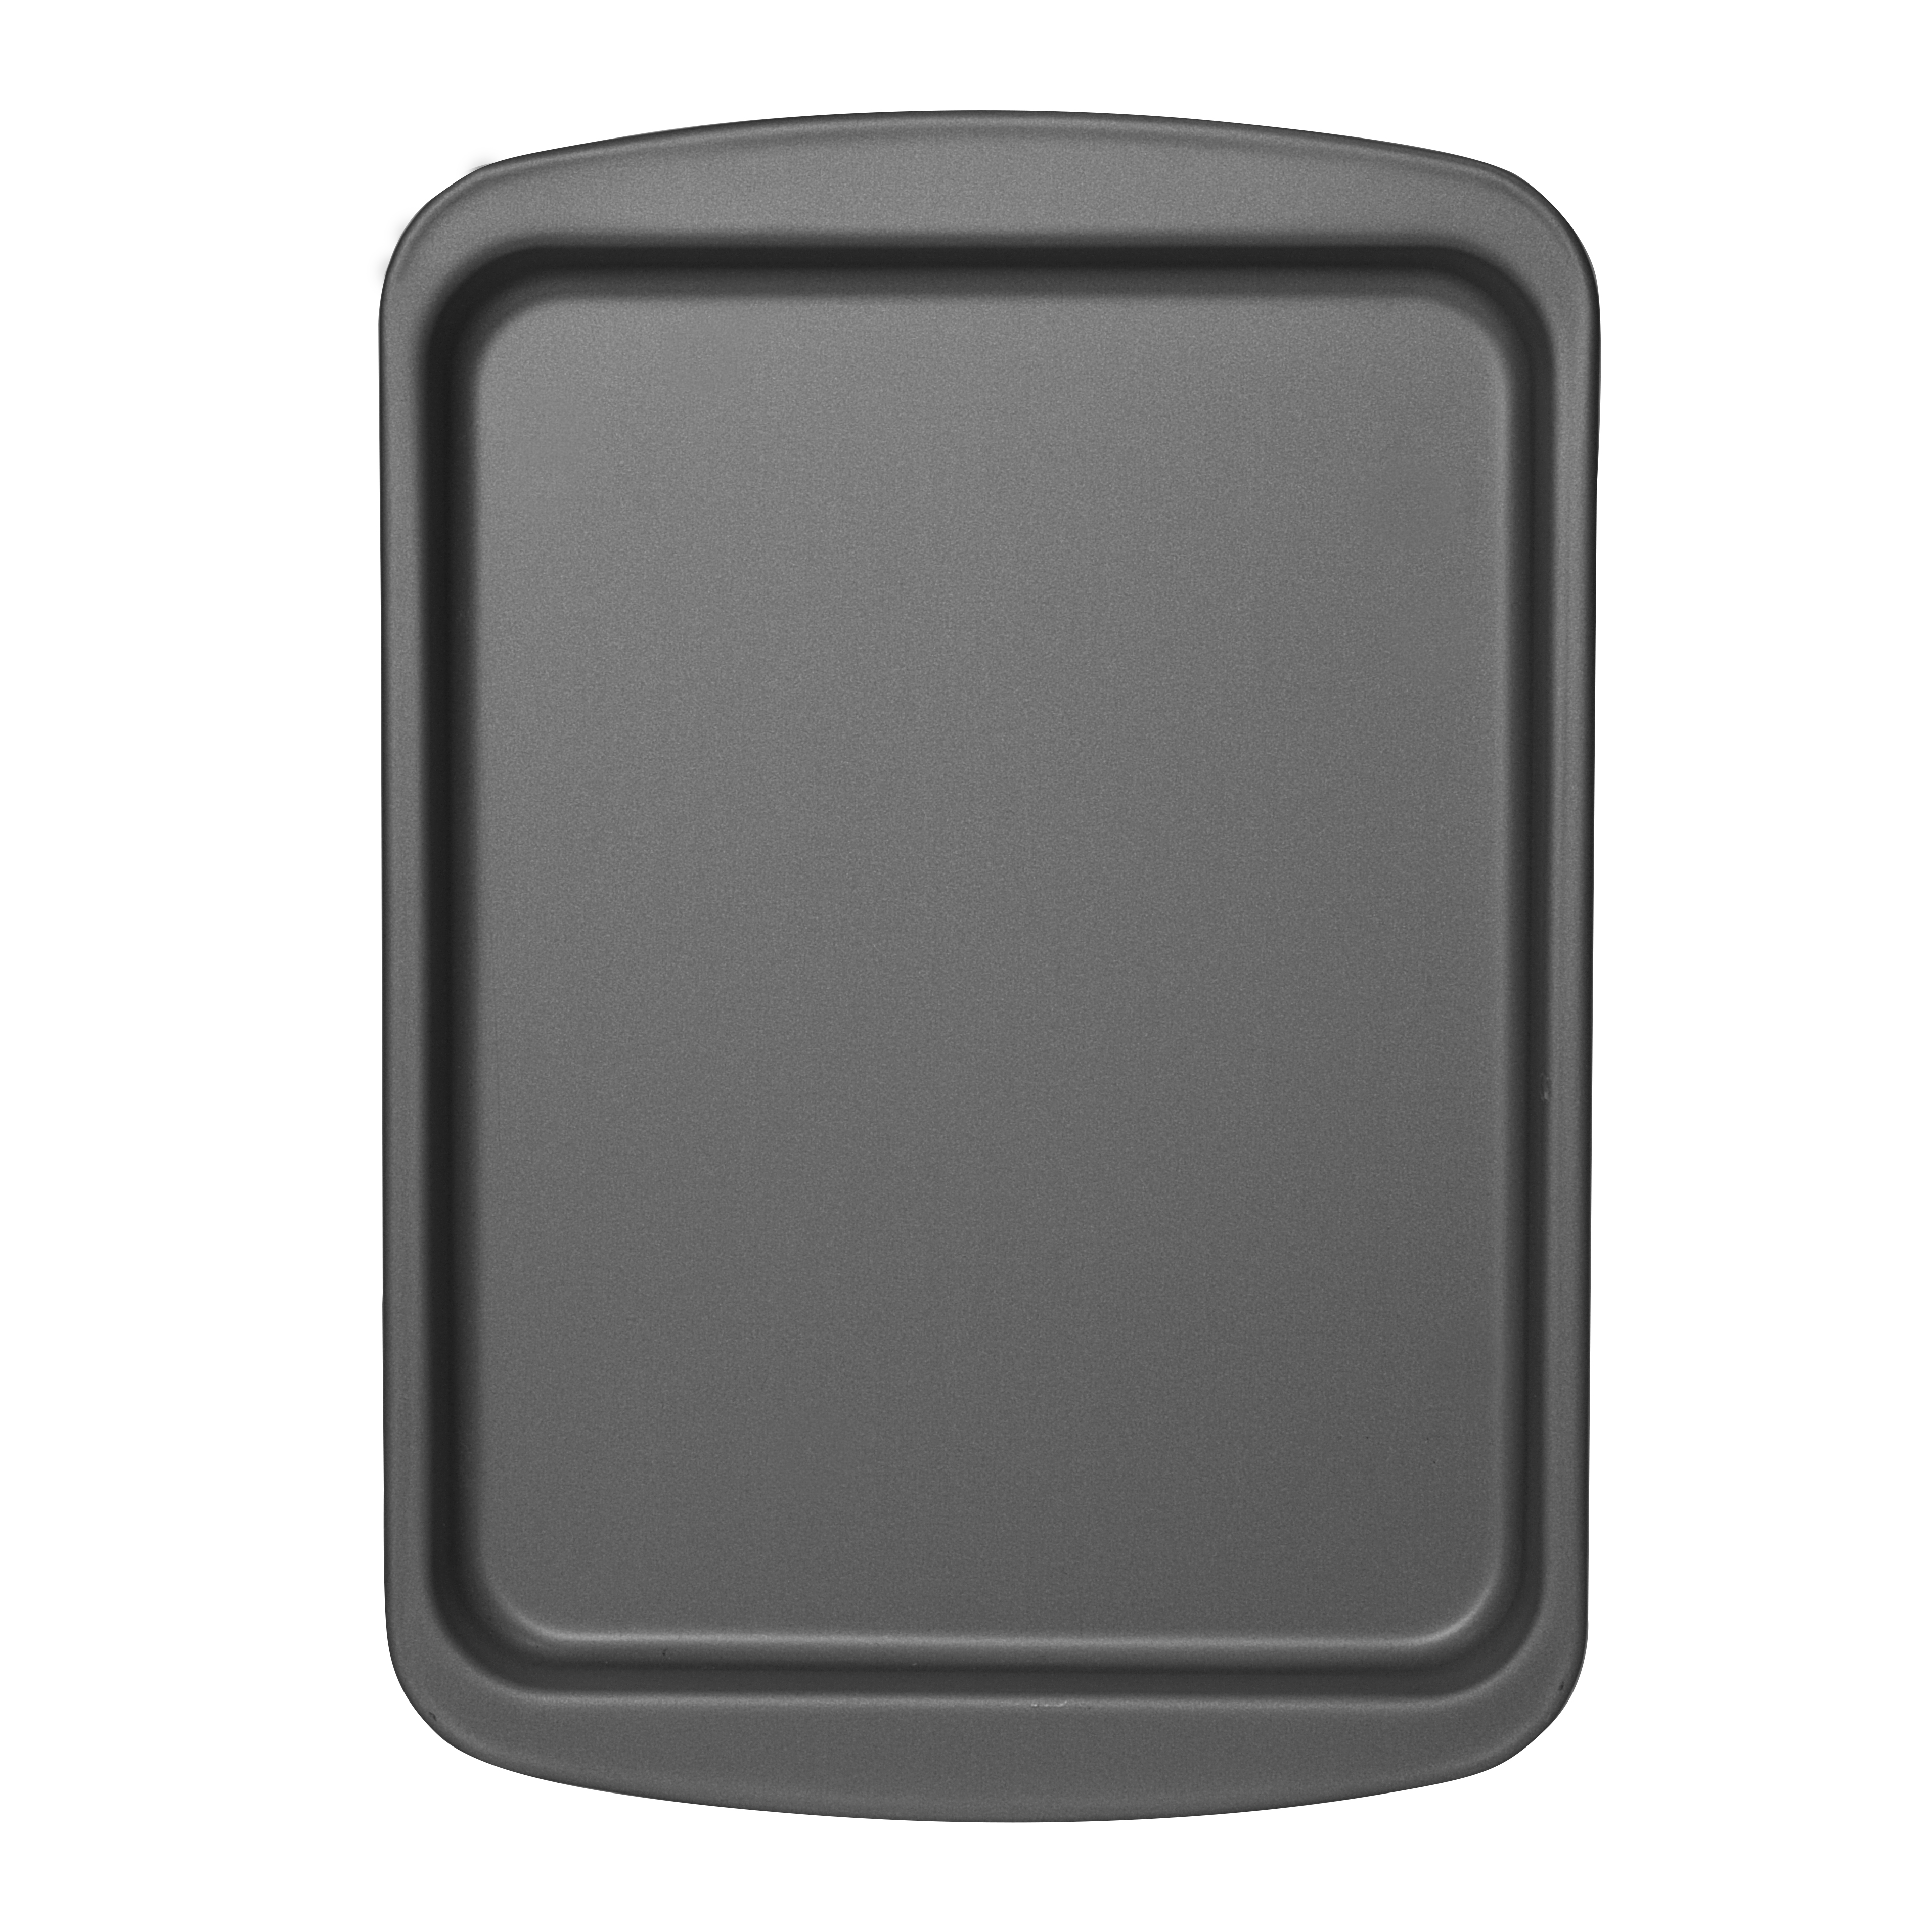 Mainstays Nonstick Mini Cookie Sheet,  8.5" x 6.5", Toaster Oven Pan, Gray - image 1 of 7